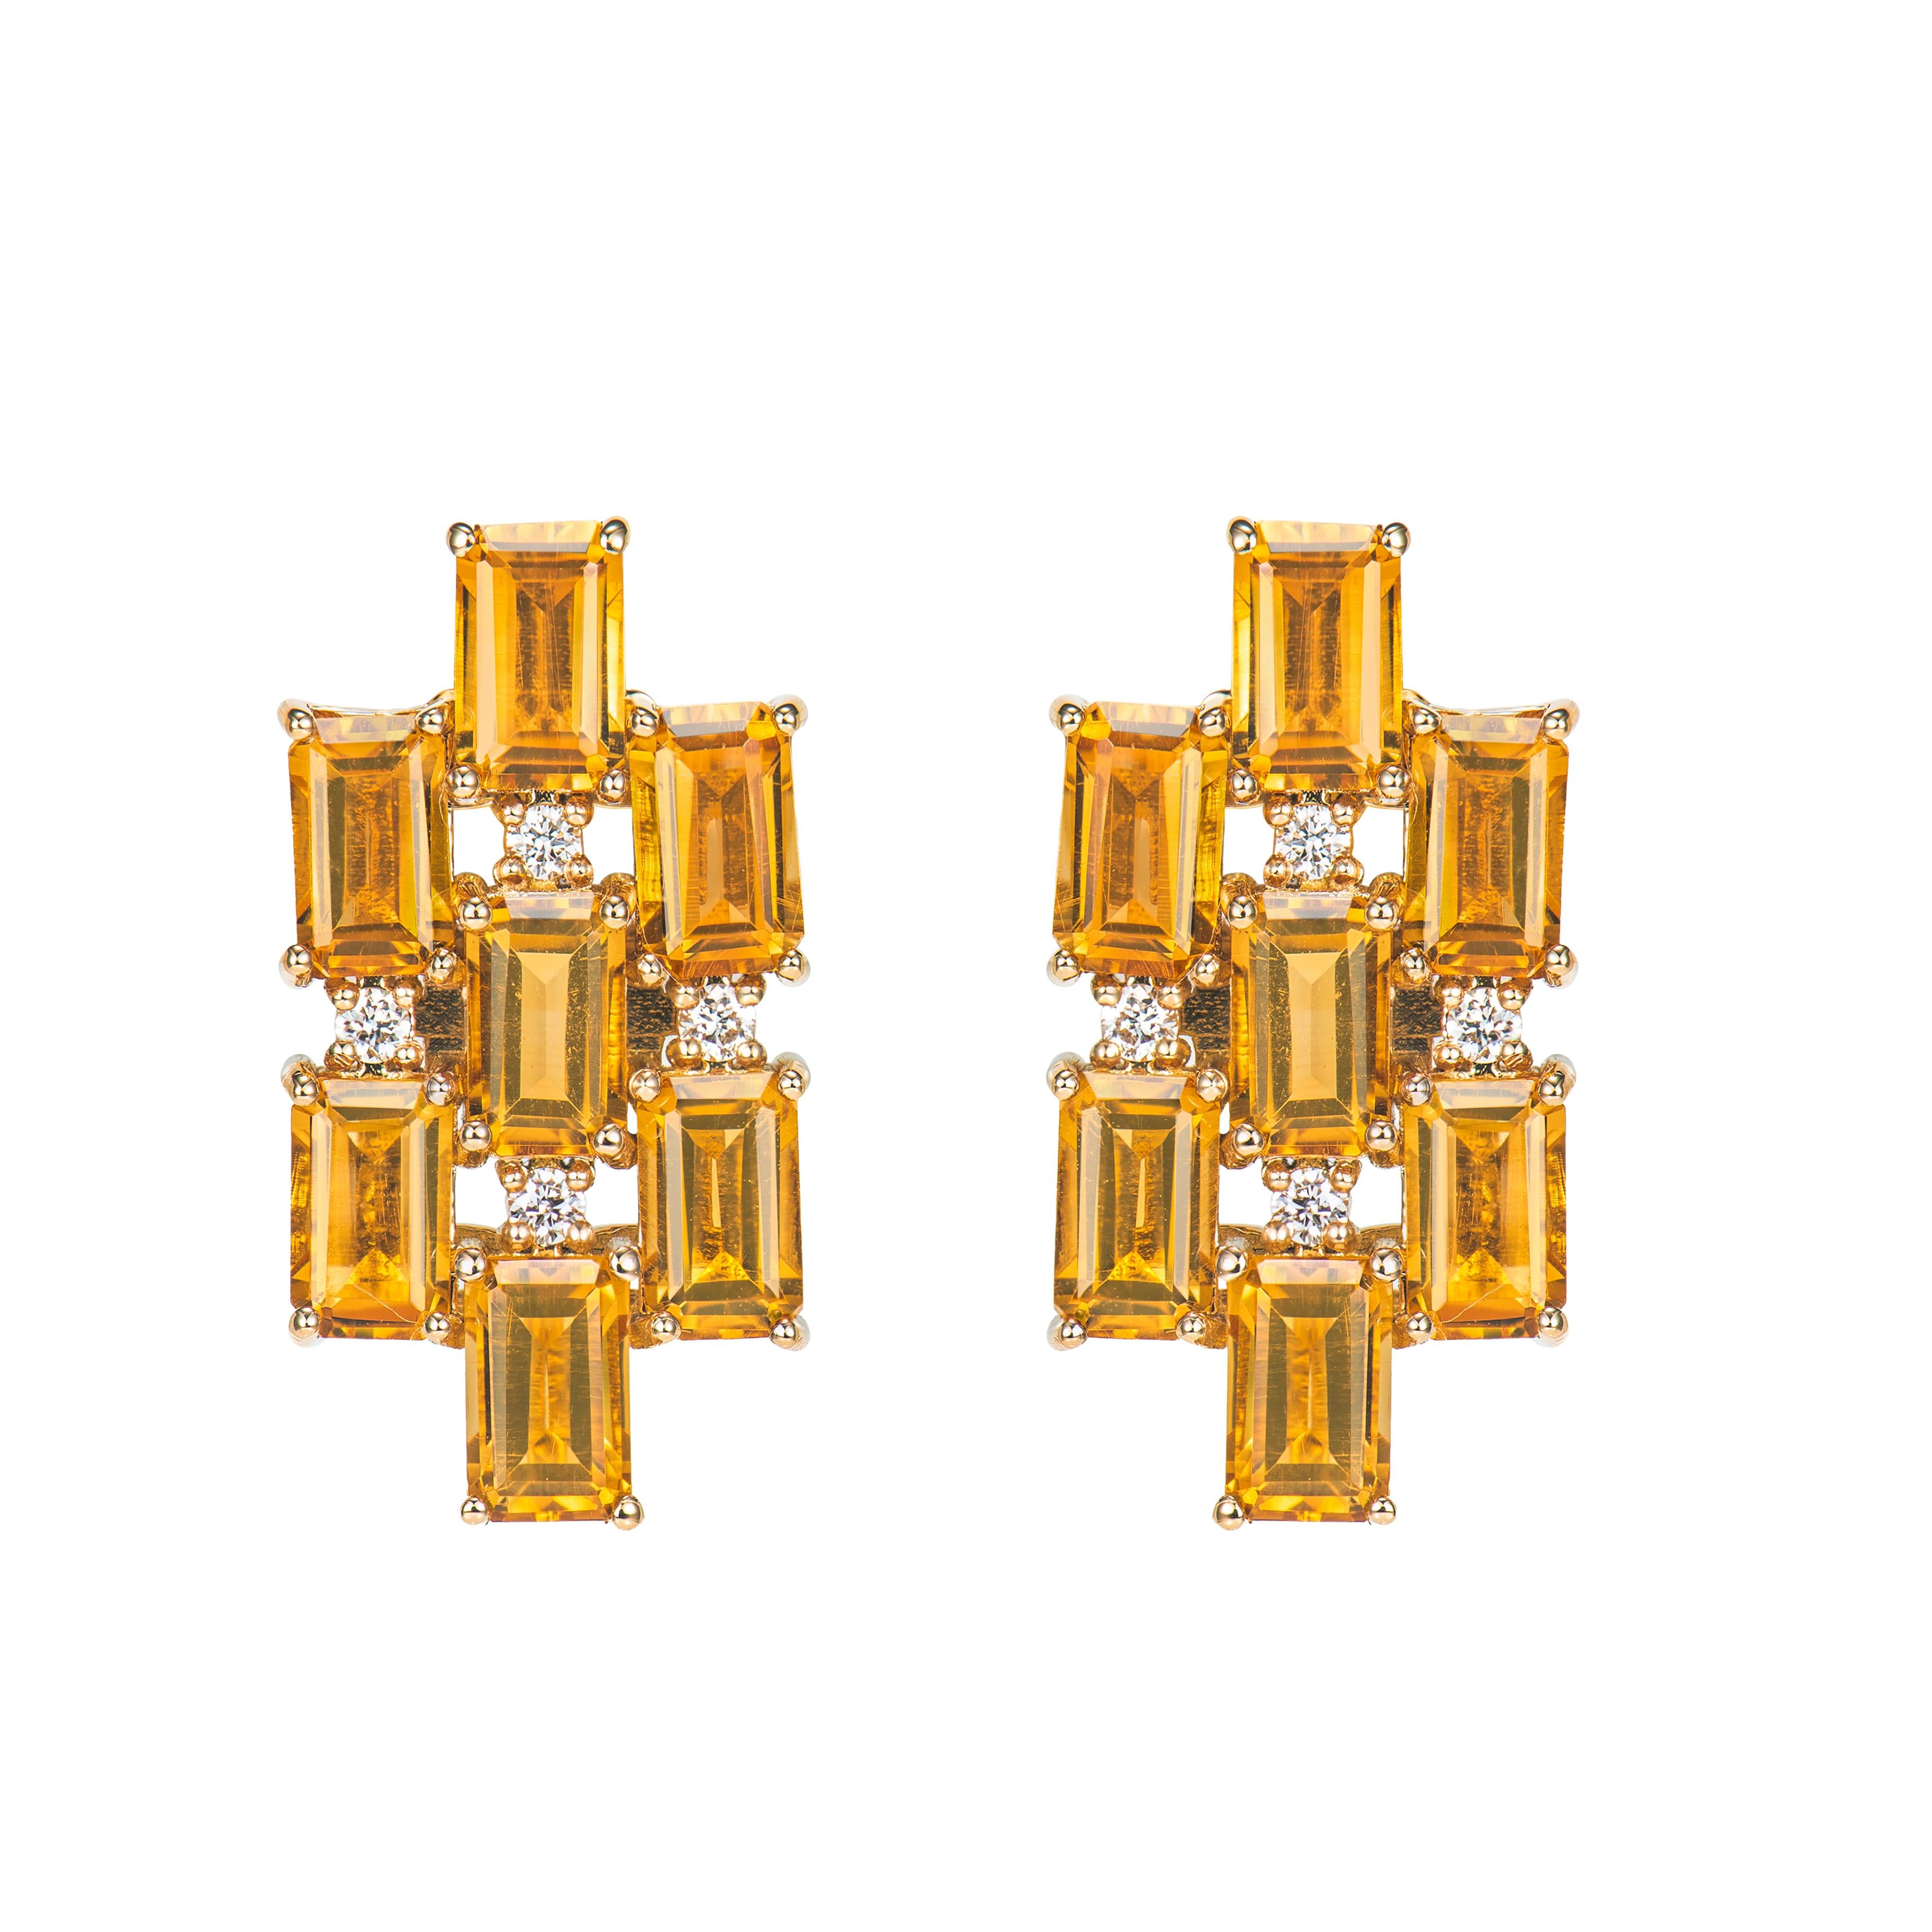 Contemporary 4.042 Carat Citrine Drop Earring in 18Karat Yellow Gold with White Diamond. For Sale